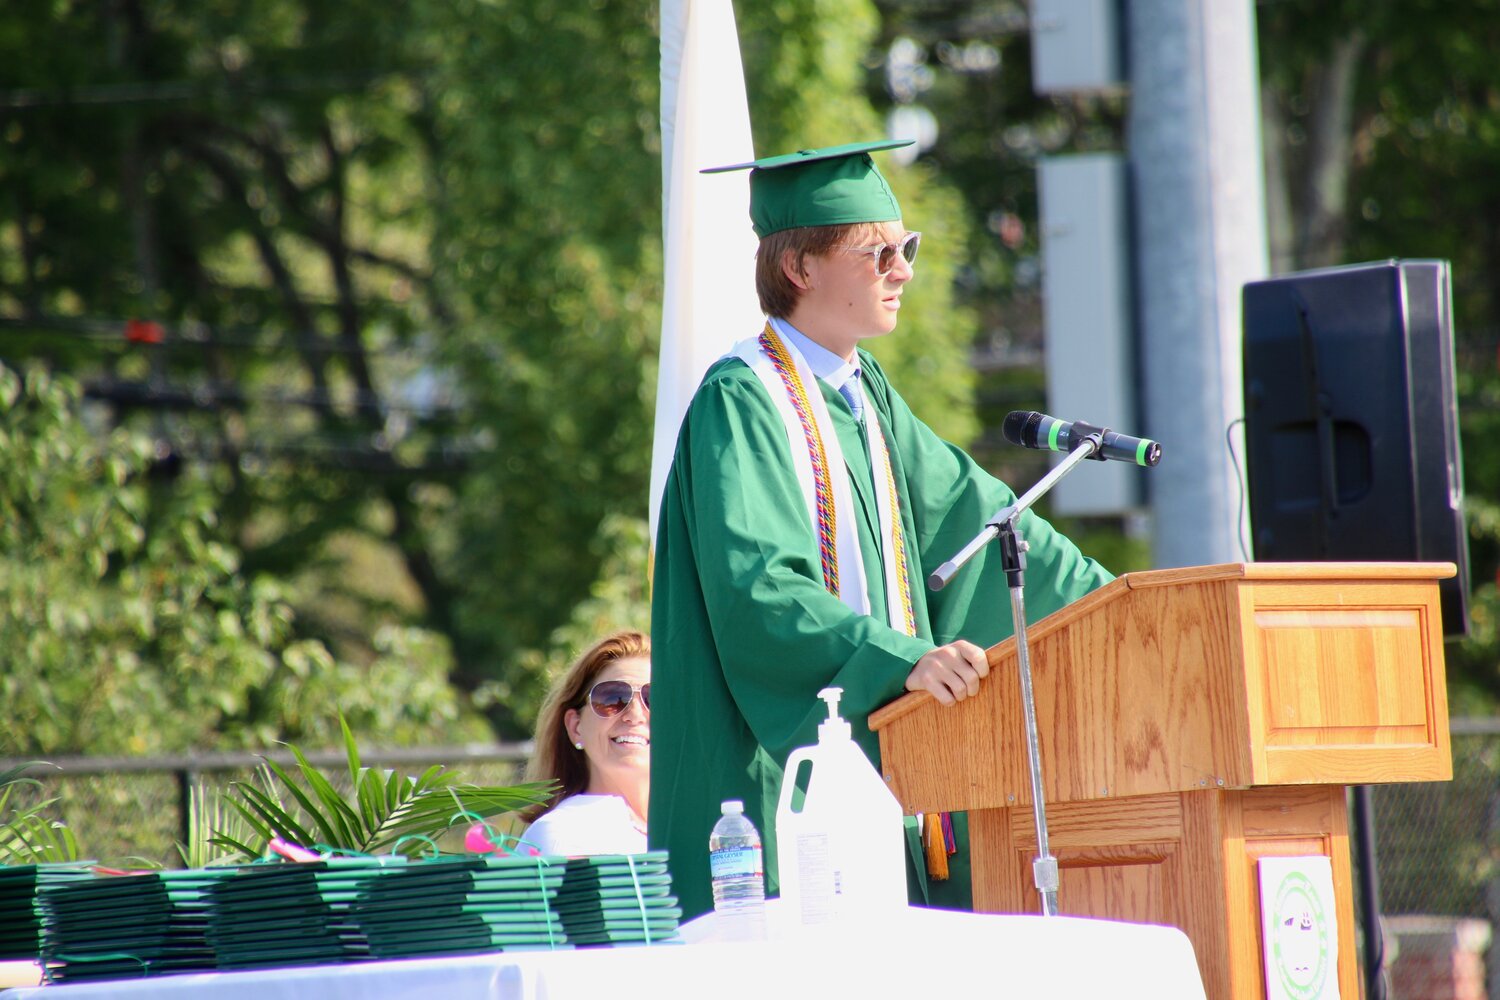 President of the MERHS Class 0f 2020, Thymen de Widt, addresses his classmates at a socially- distanced graduation ceremony on Friday afternoon. A beautiful afternoon greeted relatives of the class, during a less-than-normal gathering at Hyland Field. 